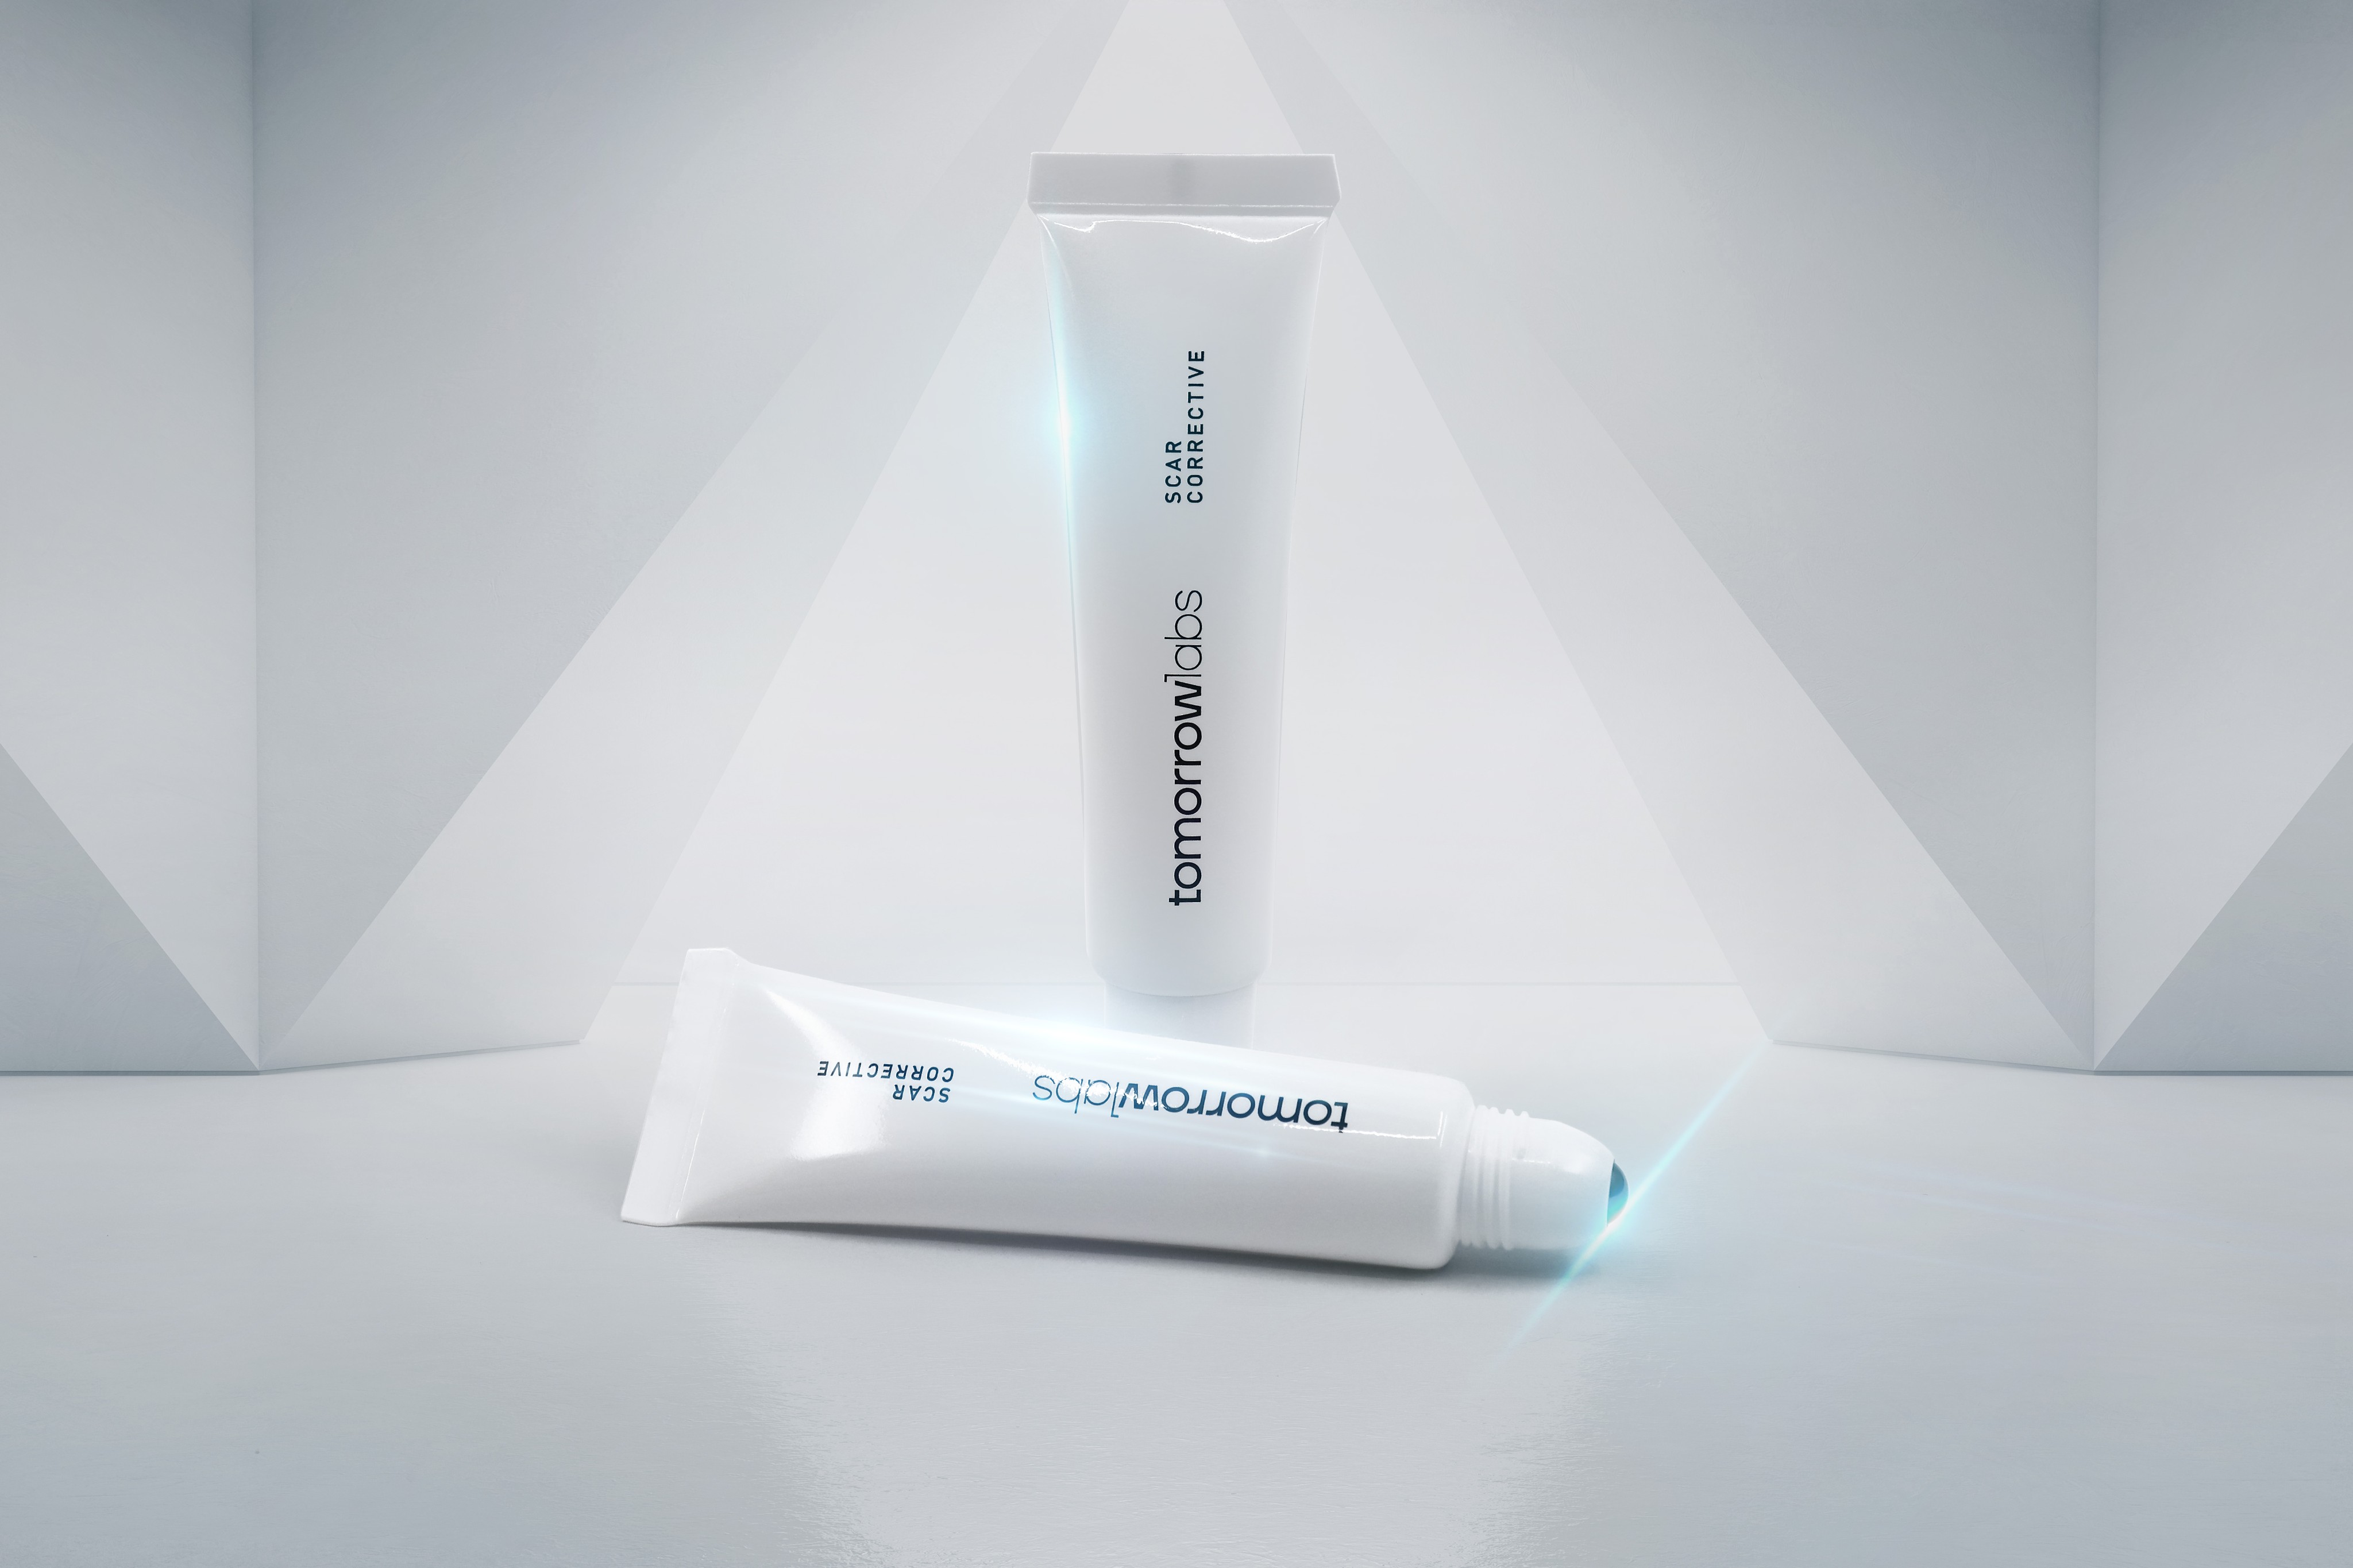 Skincare-product-tomorrowlabs-scar-correcting-1-unlimited-Web-Rendition